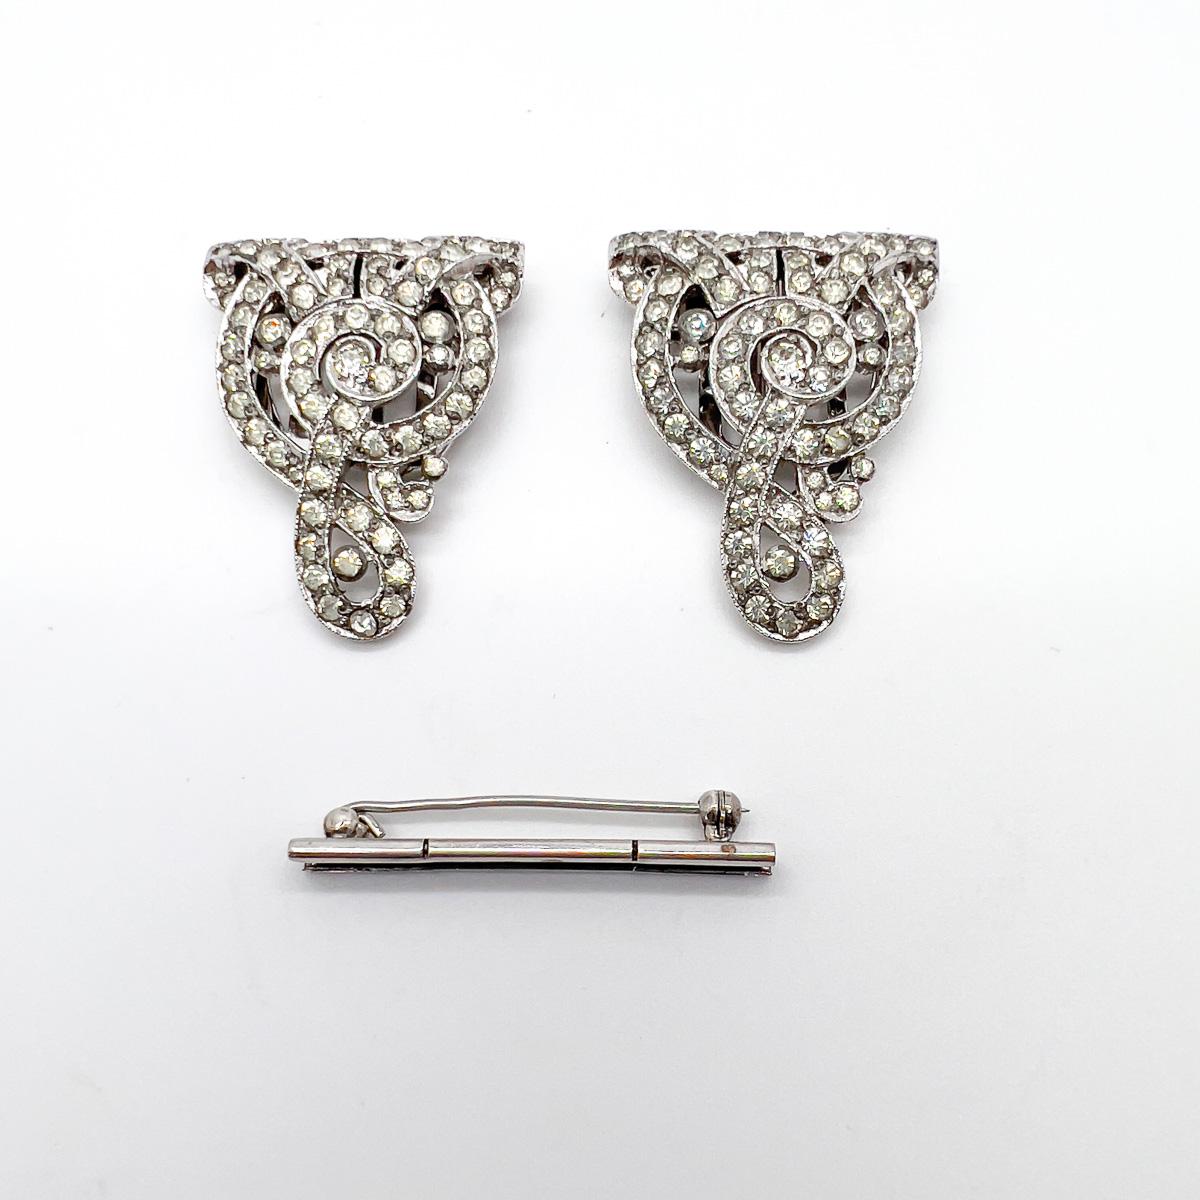 Vintage Ciro Paste Double Dress Clip Brooch 1930s In Good Condition For Sale In Wilmslow, GB